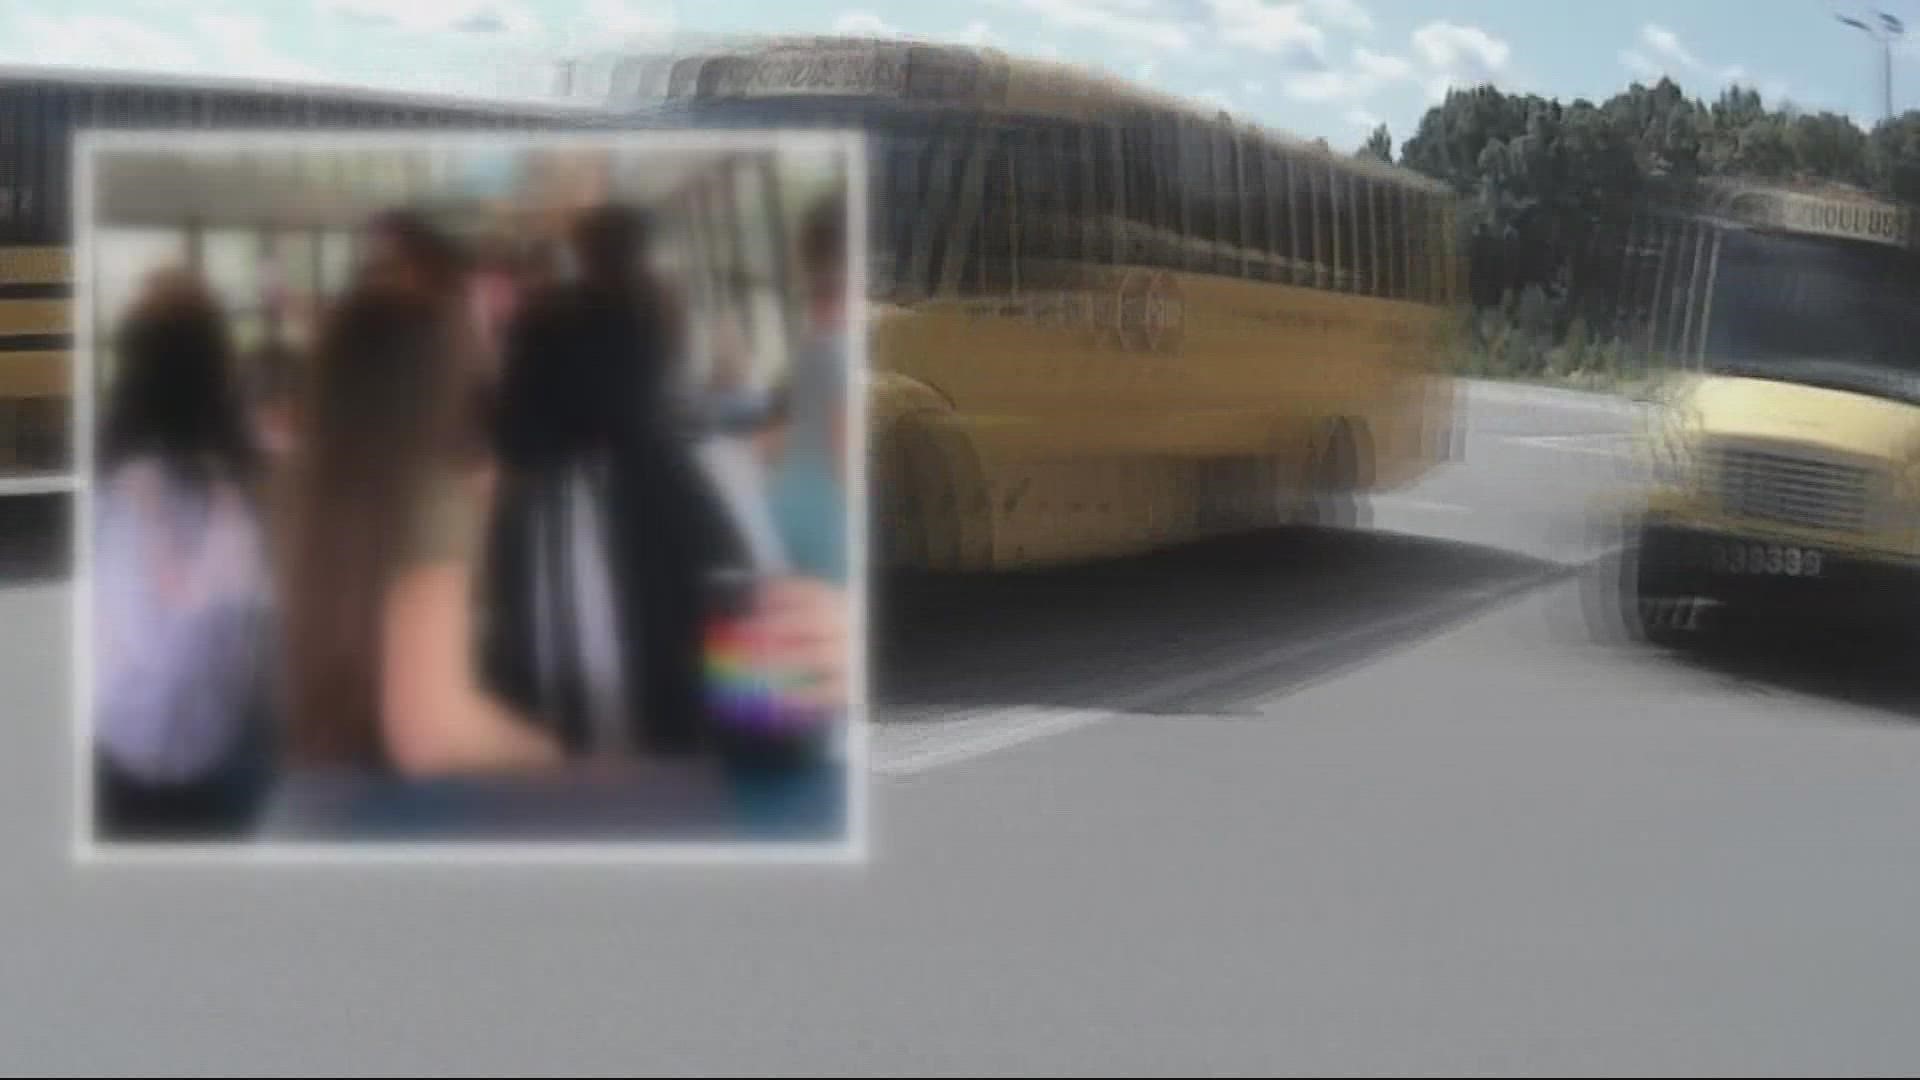 District leaders say overcrowded buses are caused by an influx of new students as well as many students who hadn't registered to ride the bus hopping aboard.